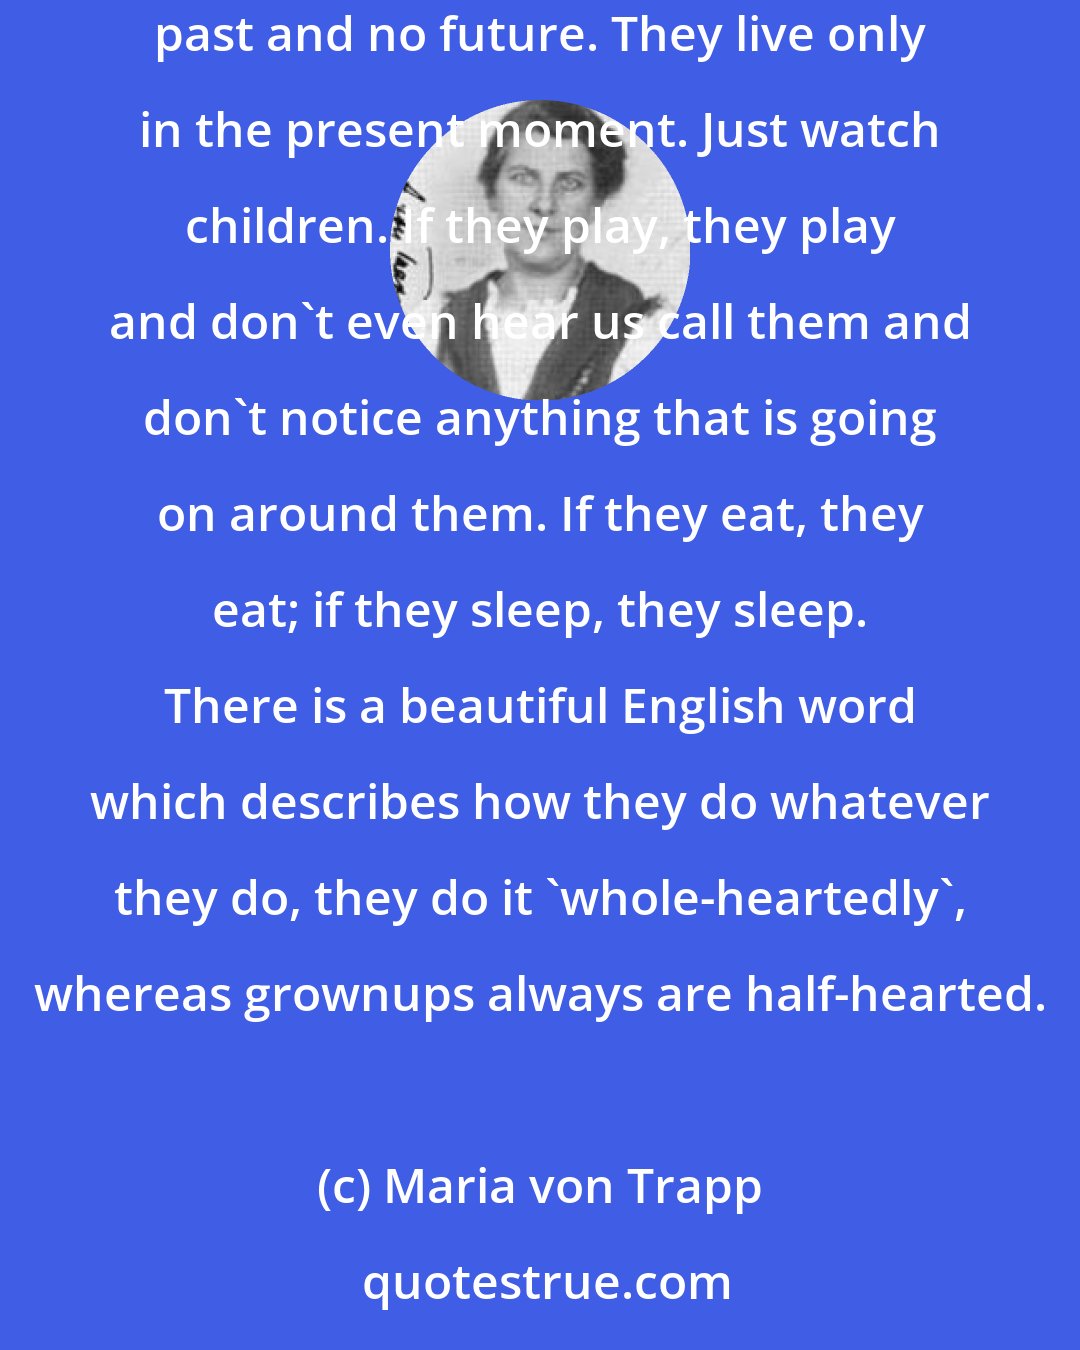 Maria von Trapp: The most striking difference between little ones and grownups is that little ones cannot worry, and they cannot worry because they have no past and no future. They live only in the present moment. Just watch children. If they play, they play and don't even hear us call them and don't notice anything that is going on around them. If they eat, they eat; if they sleep, they sleep. There is a beautiful English word which describes how they do whatever they do, they do it 'whole-heartedly', whereas grownups always are half-hearted.